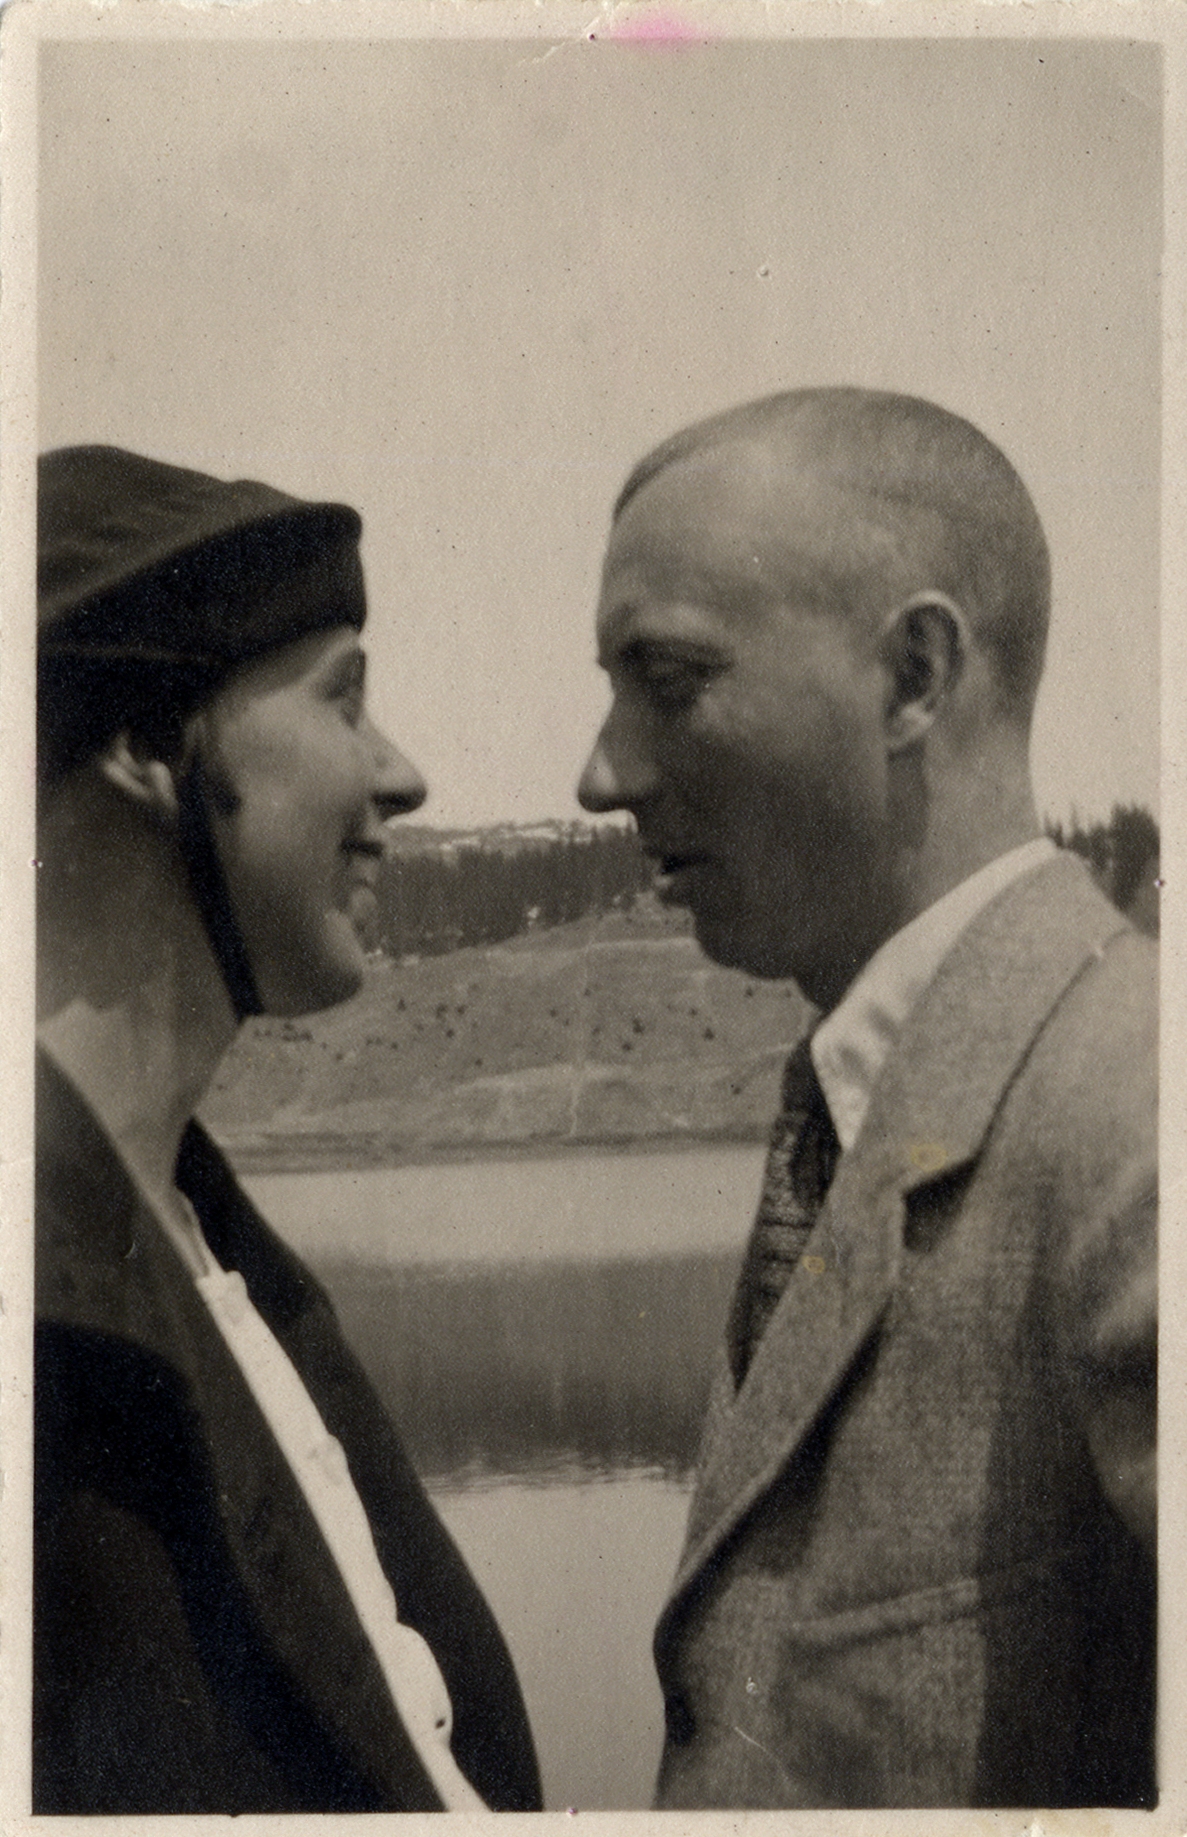 Sophie Taeuber and Hans Arp, Arosa 1918 | Photo: Archiv Stiftung Arp e. V., Berlin/Rolandswerth